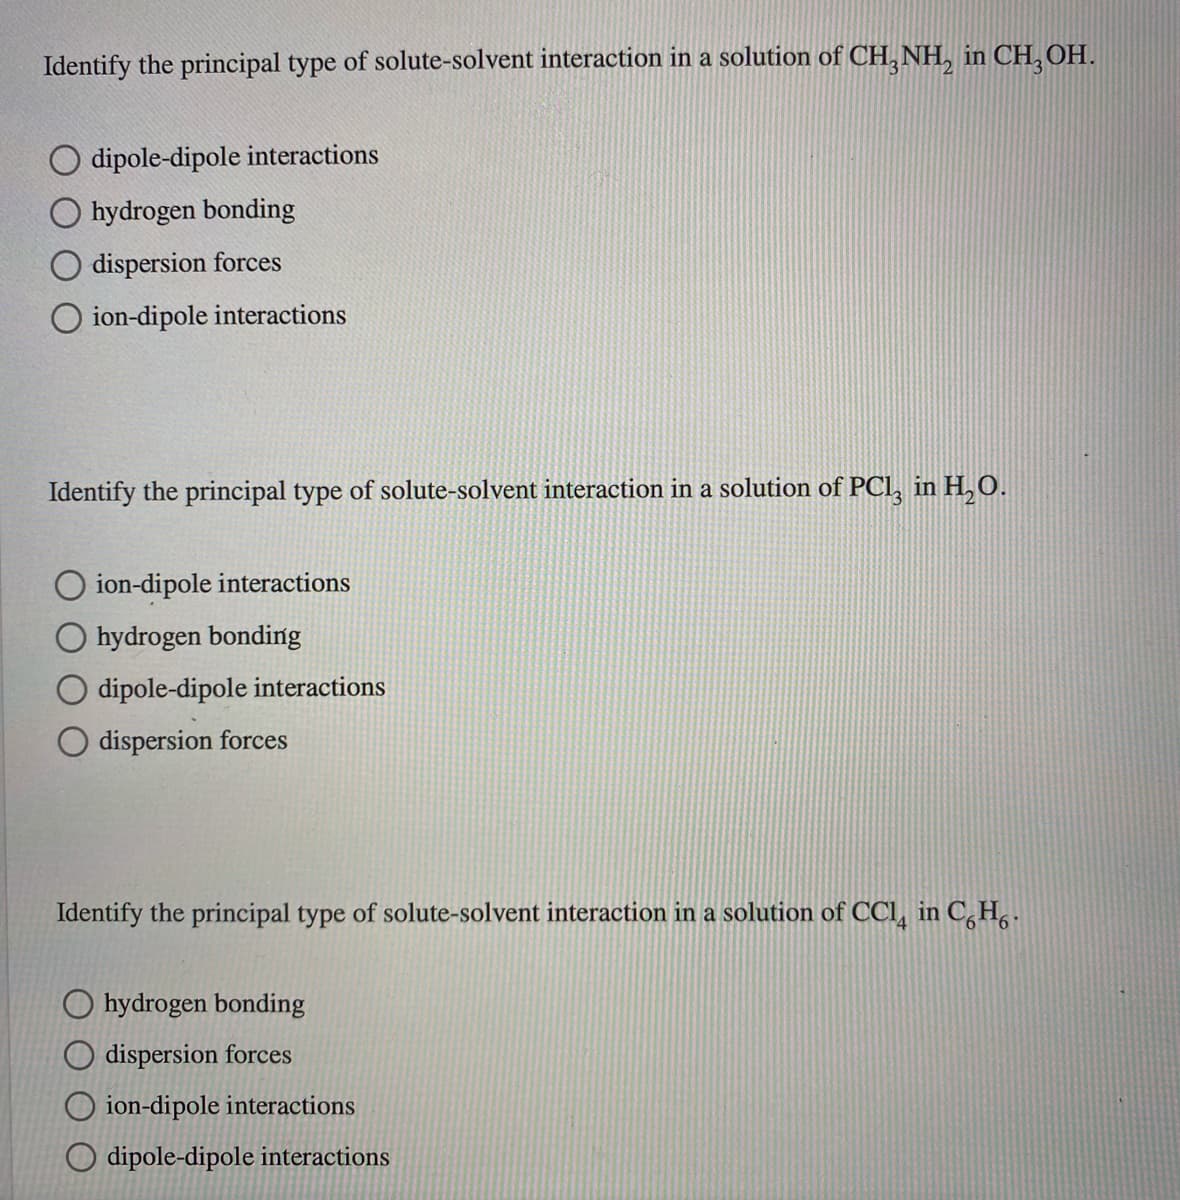 Identify the principal type of solute-solvent interaction in a solution of CH, NH, in CH, OH.
dipole-dipole interactions
hydrogen bonding
dispersion forces
O ion-dipole interactions
Identify the principal type of solute-solvent interaction in a solution of PCl, in H,0.
O ion-dipole interactions
hydrogen bonding
dipole-dipole interactions
dispersion forces
Identify the principal type of solute-solvent interaction in a solution of CCl, in C,H .
O hydrogen bonding
O dispersion forces
O ion-dipole interactions
O dipole-dipole interactions
